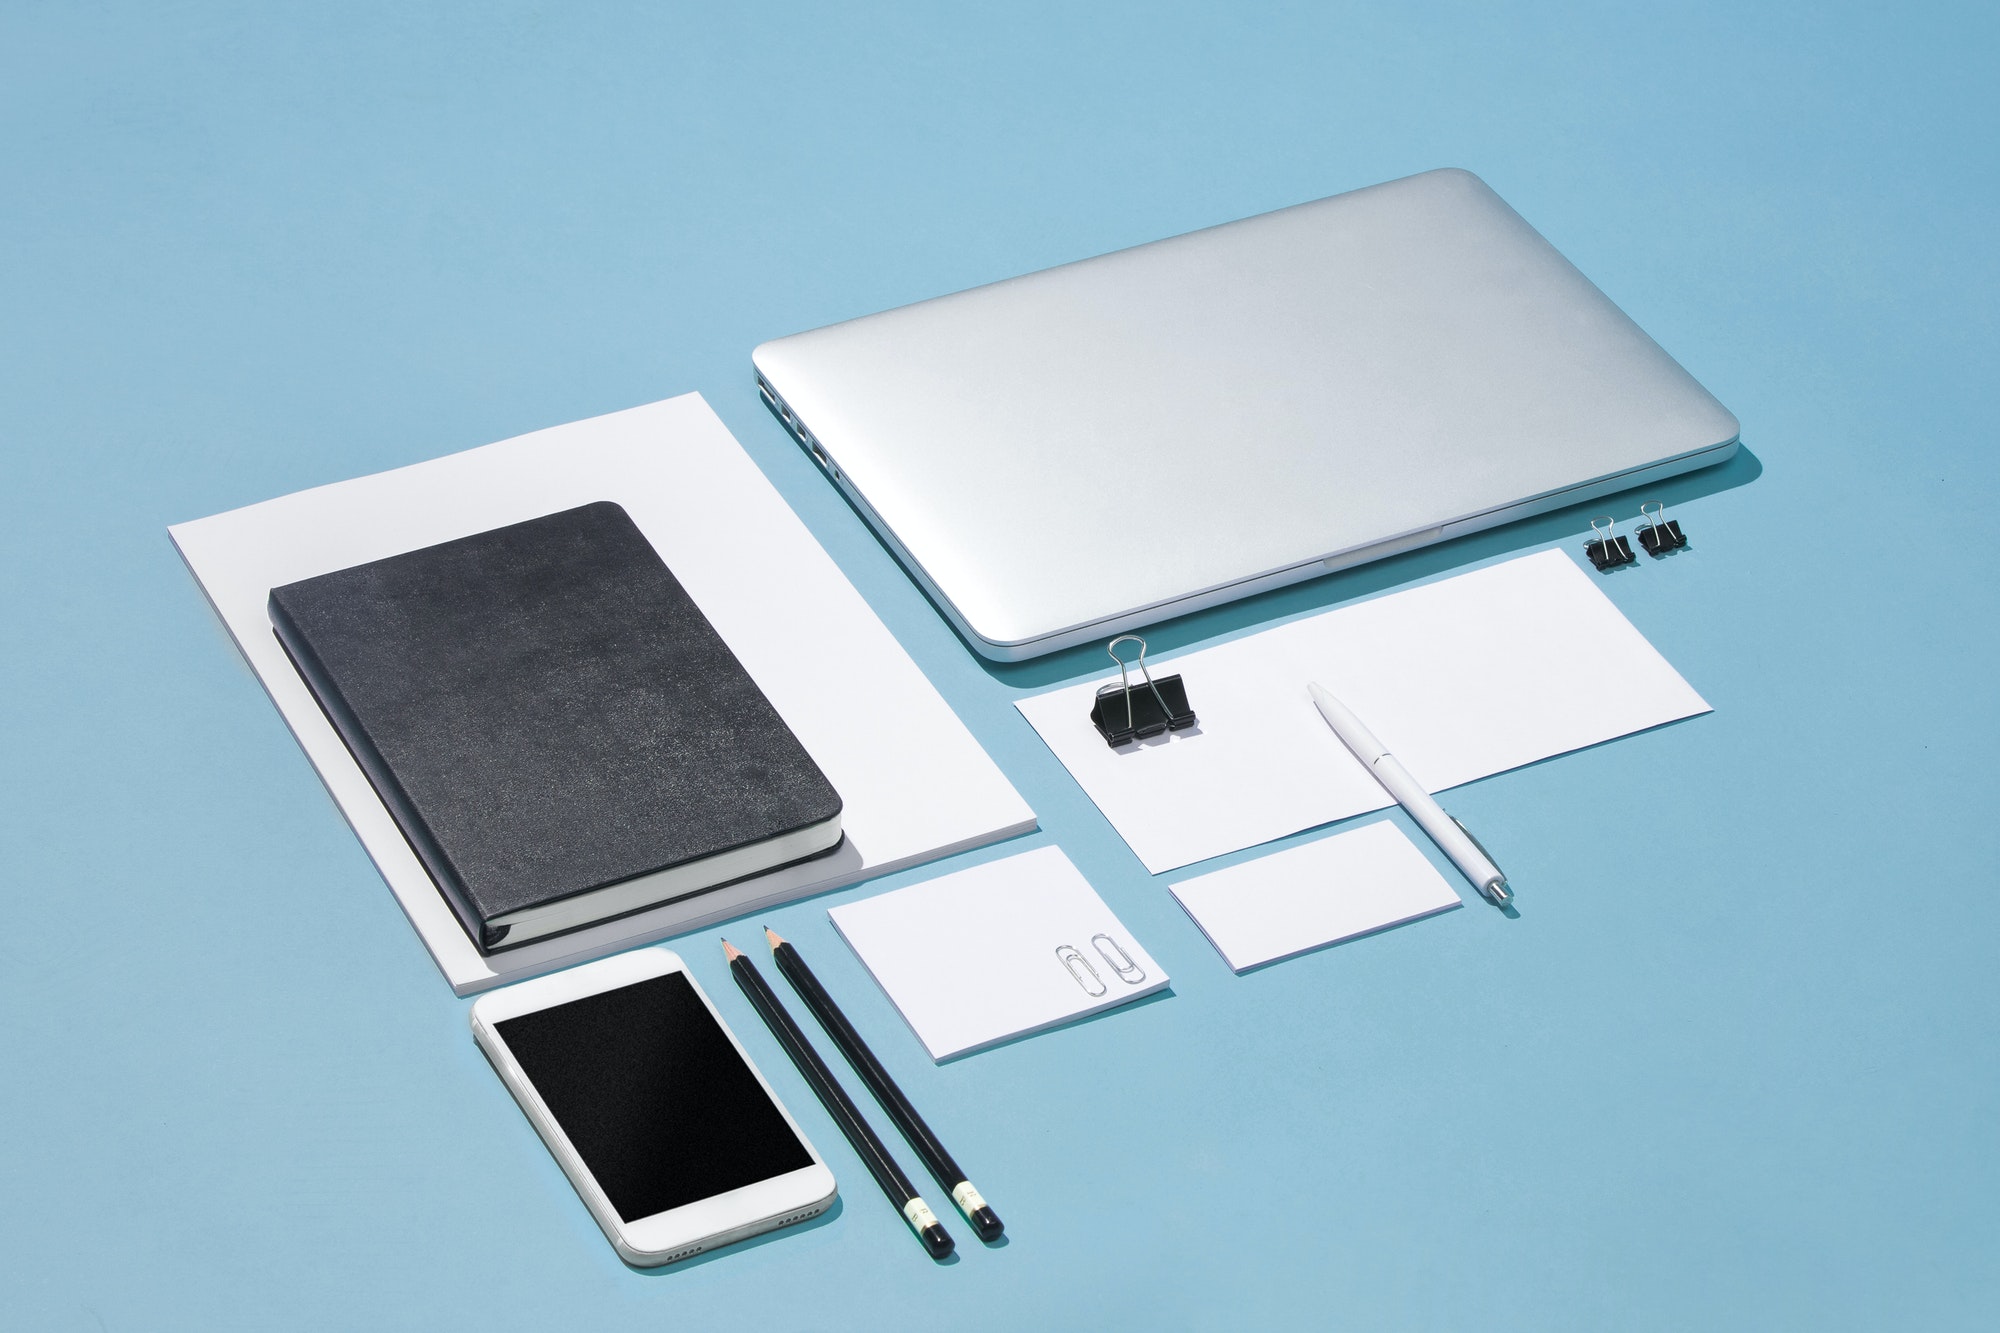 The laptop, pens, phone, note with blank screen on table